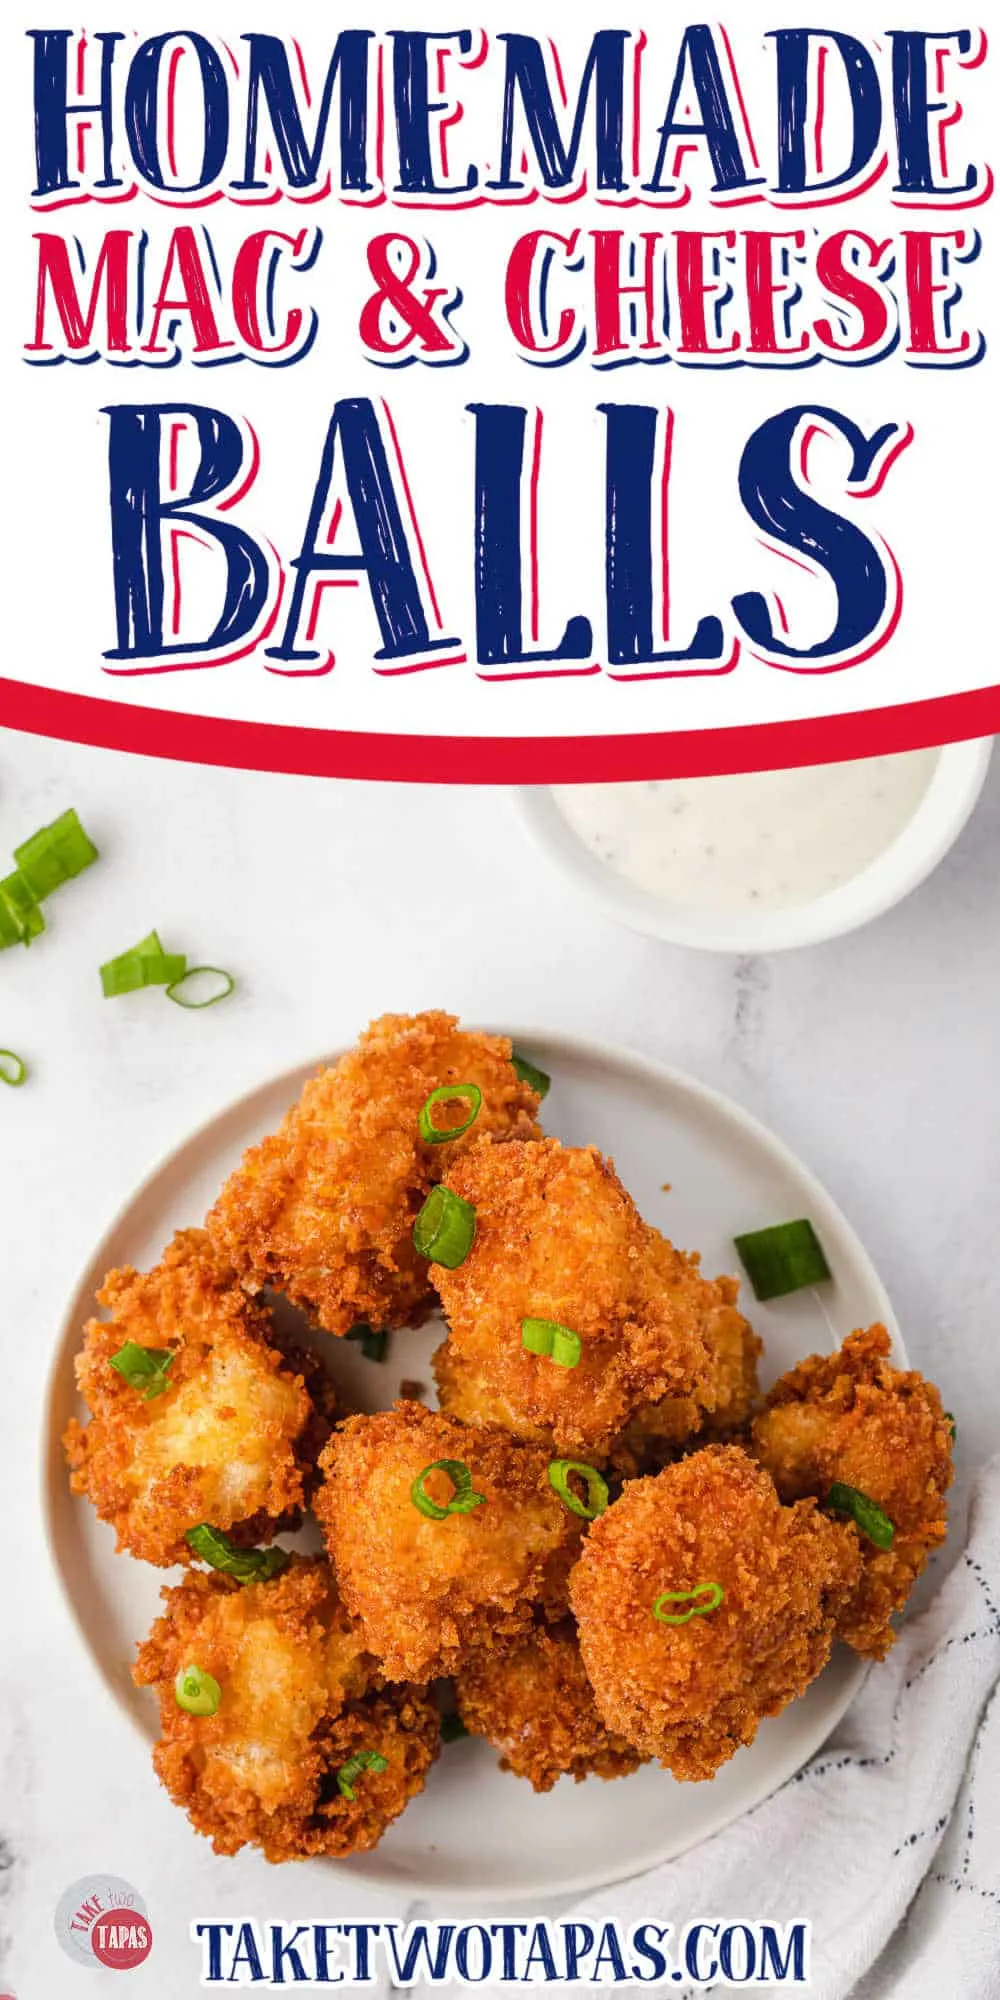 fried mac and cheese balls overhead picture with text "fried mac and cheese balls"